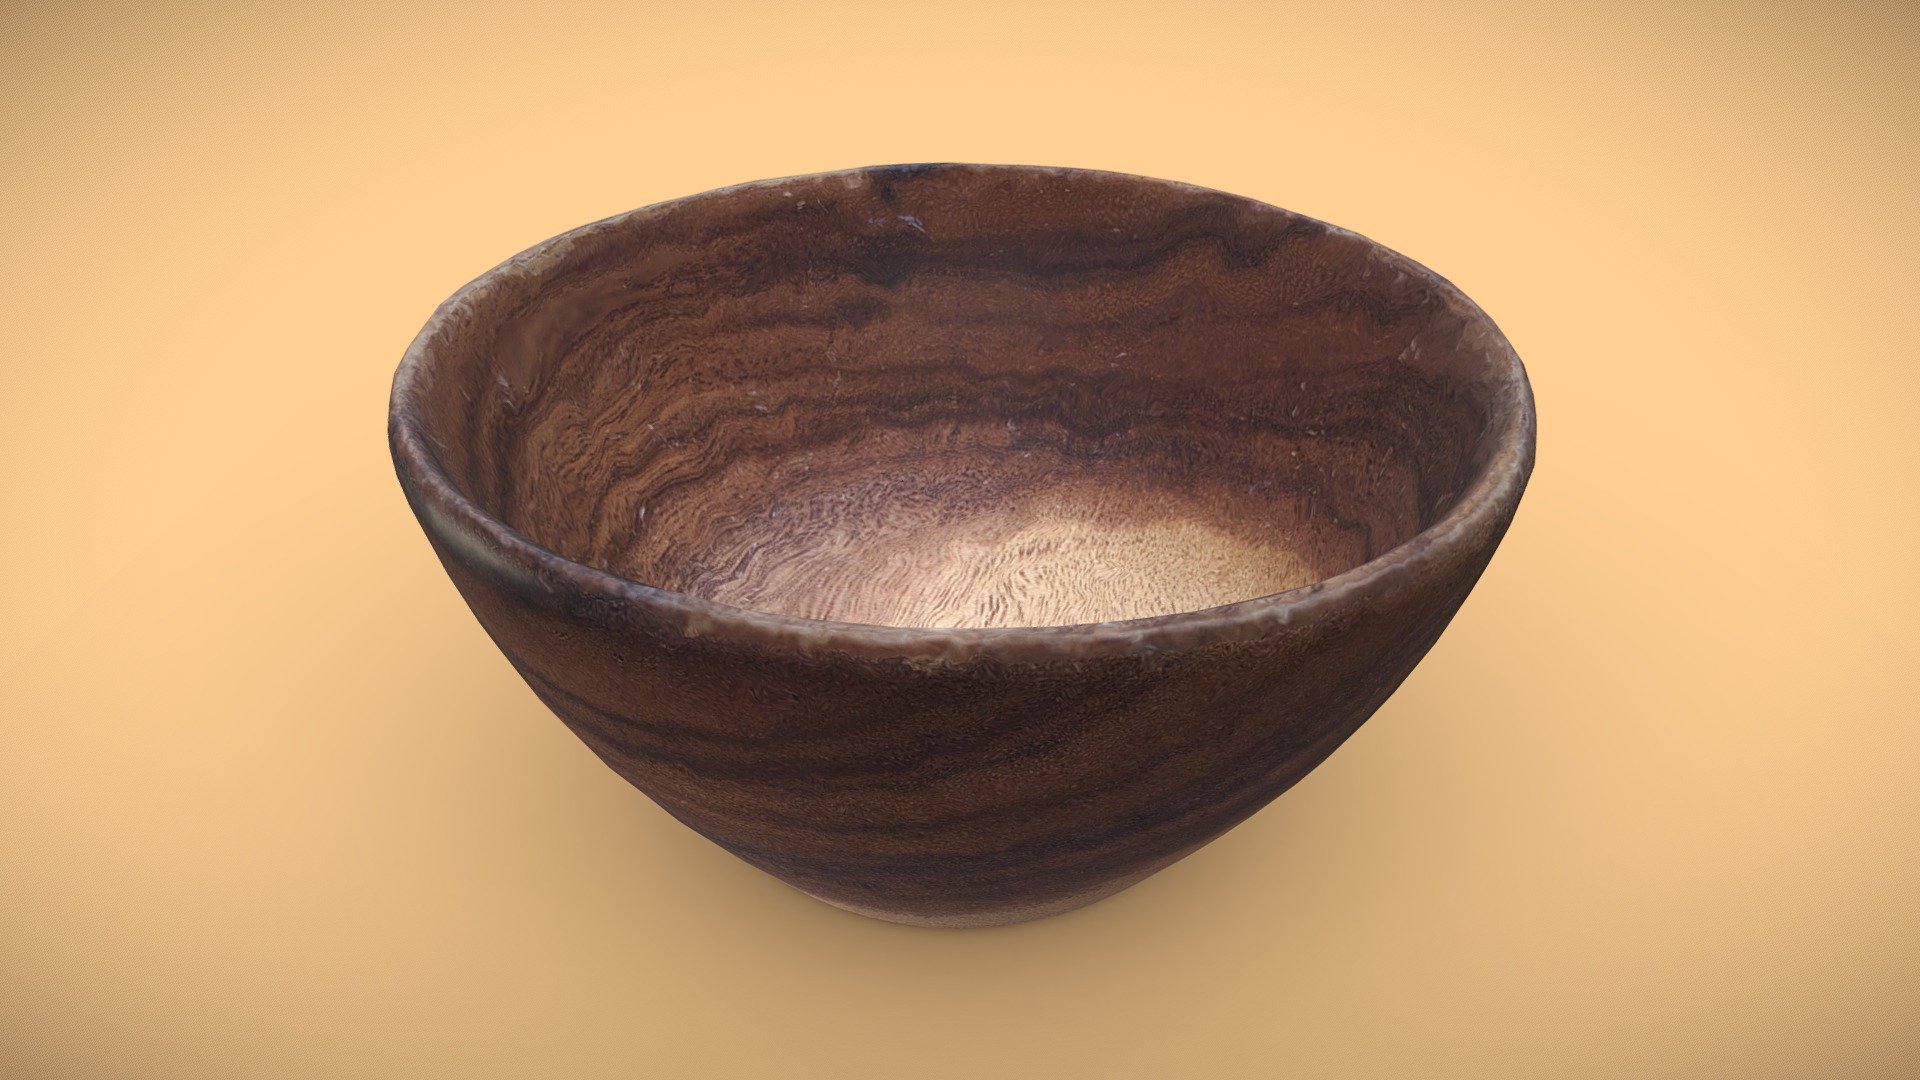 An optimised scan of a wooden fruit bowl - my entry to the #KitchenScanChallenge.

What will your entry be? Full rules and prize details:
https://sketchfab.com/blogs/community/sketchfab-3d-scanning-challenge-kitchen-ware - Wooden Bowl - #KitchenScanChallenge - Buy Royalty Free 3D model by Thomas Flynn (@nebulousflynn) 3d model